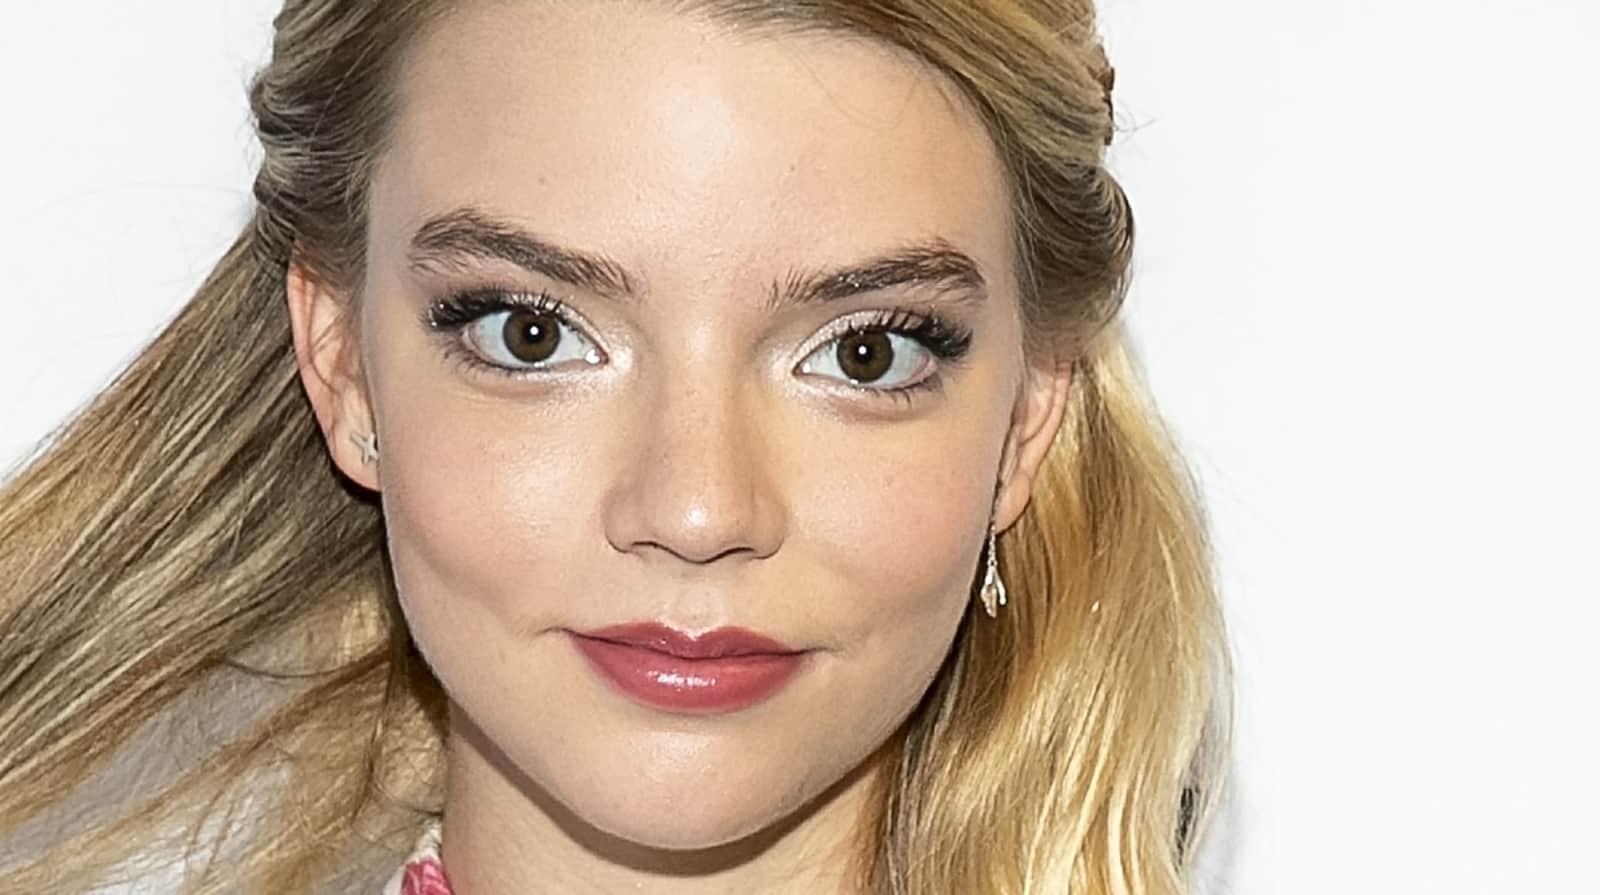 Will Anya Taylor-Joy Shave Her Head for Mad Max Prequel Furiosa?